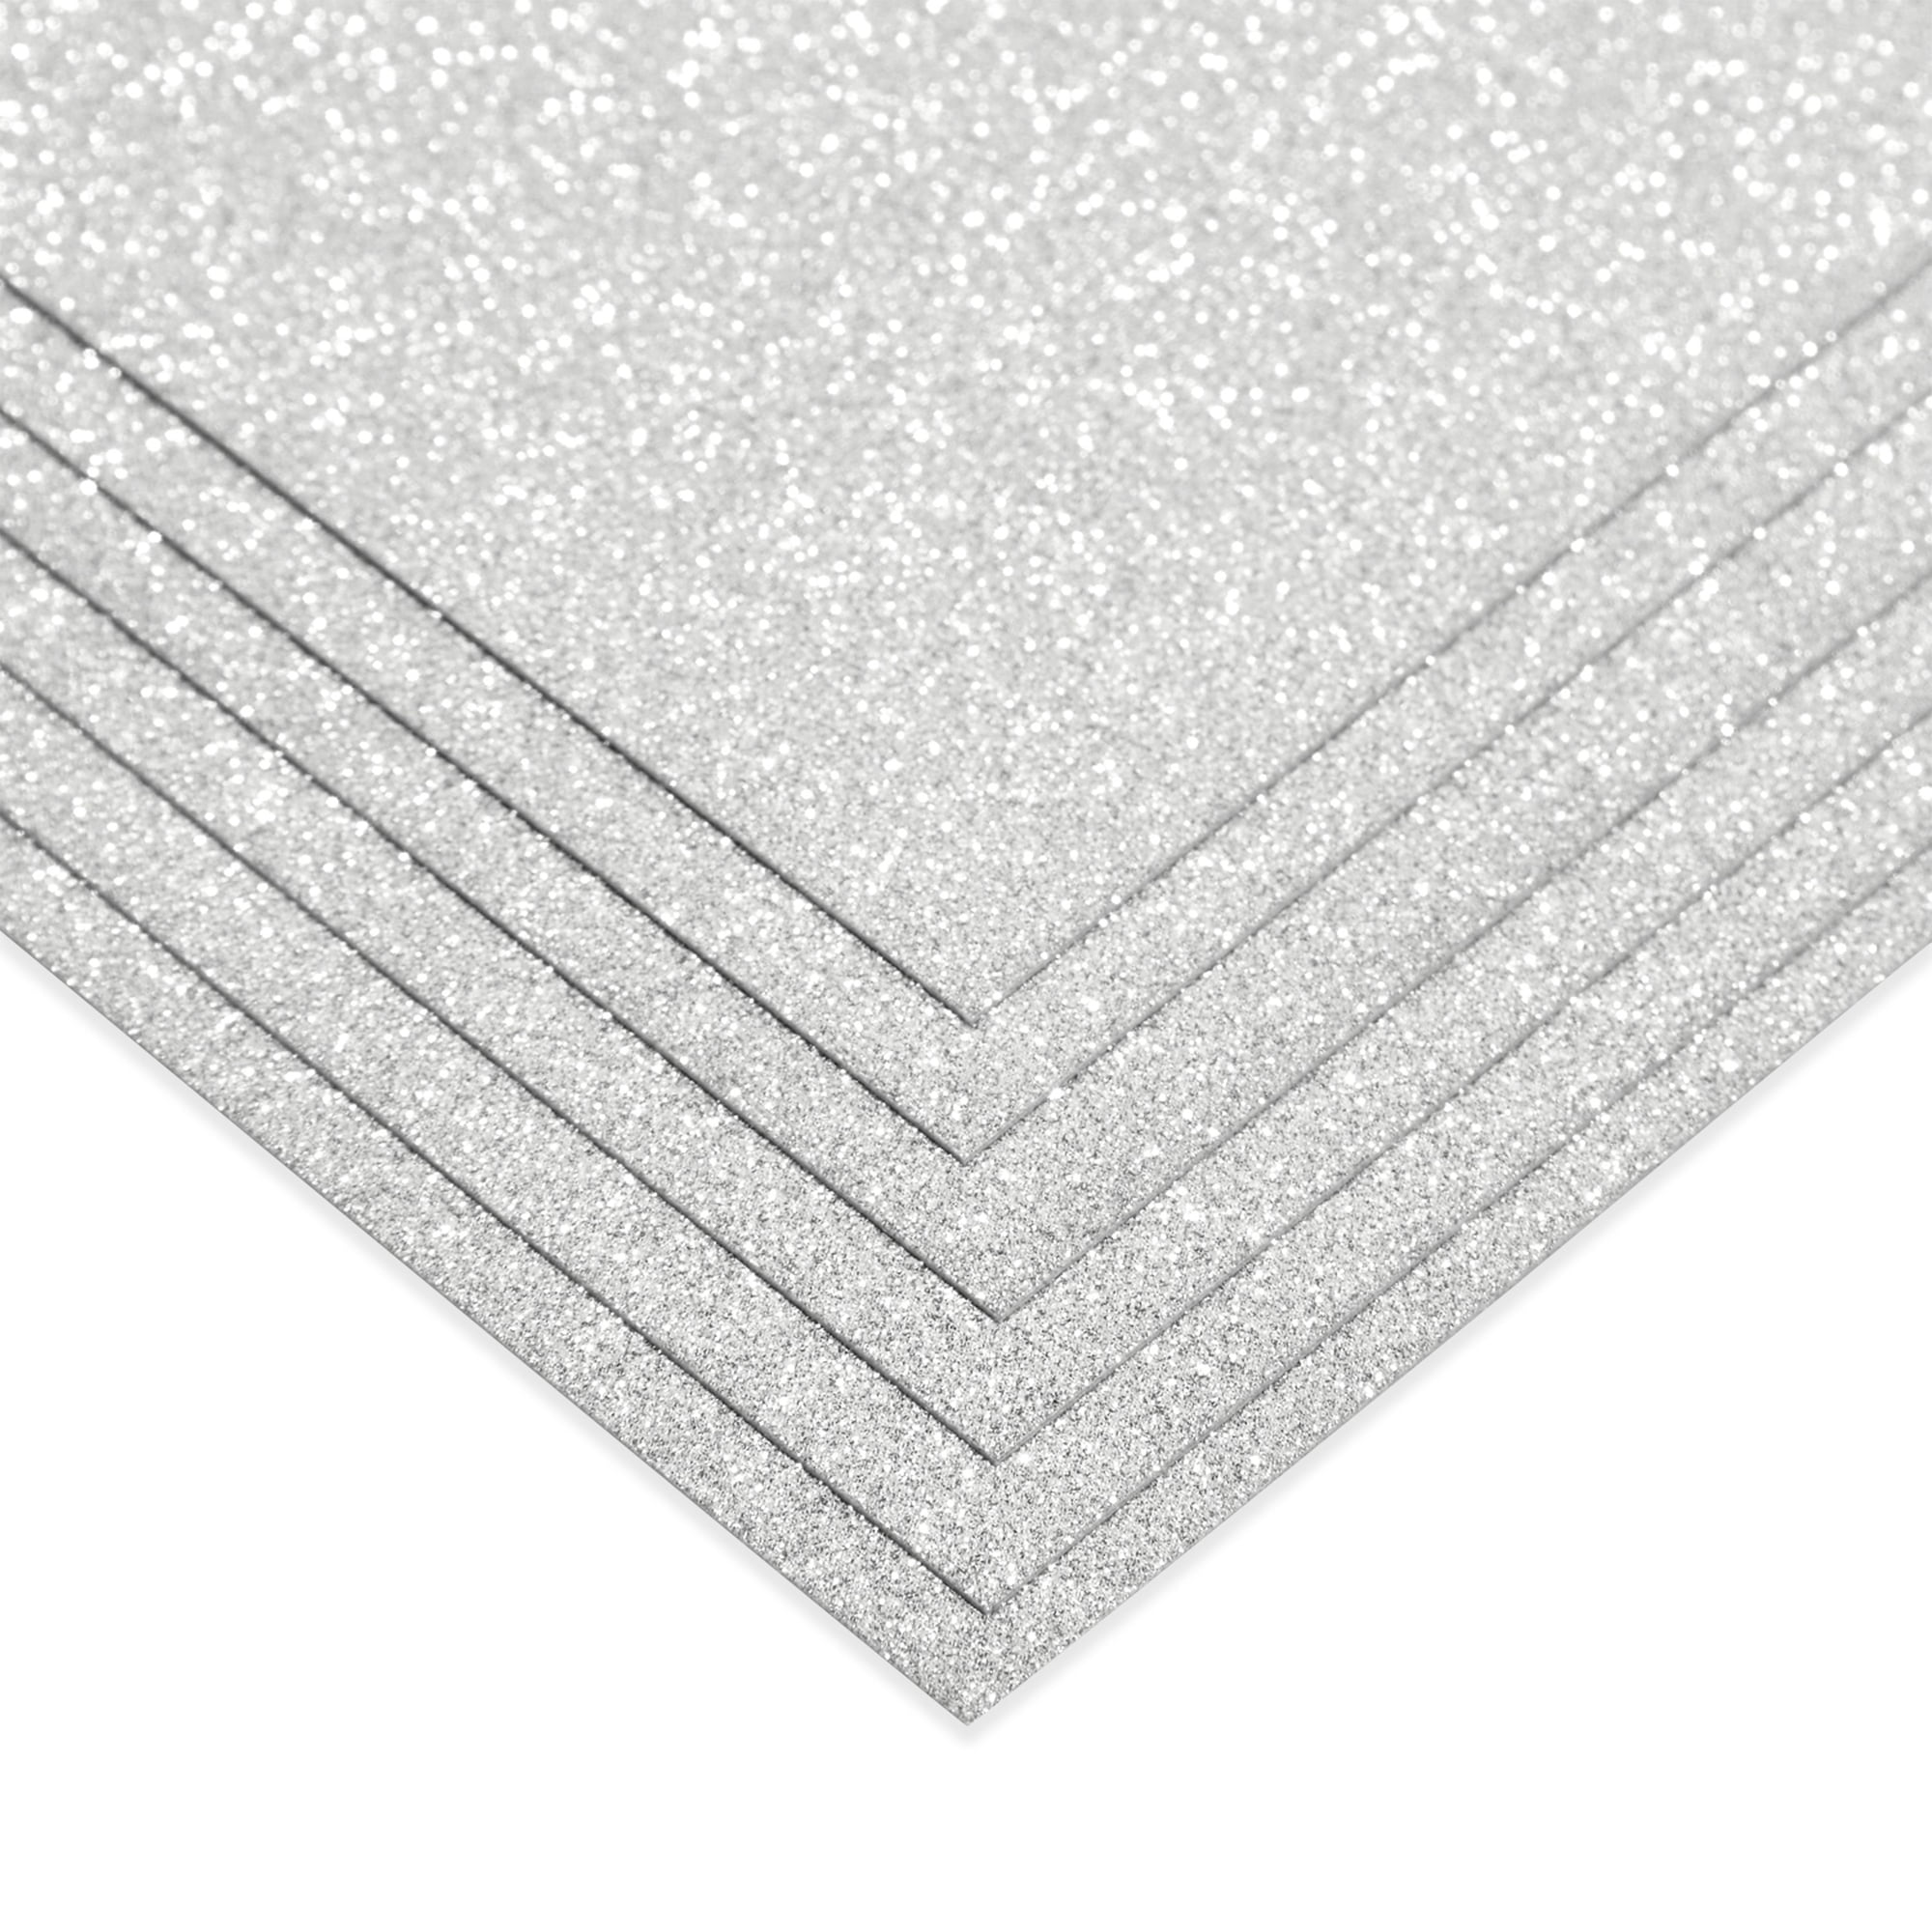 Bright Creations 24 Sheets White Glitter Cardstock Paper for Scrapbooking, Arts, DIY Sparkle Crafts, 280GSM, 8.5 x 11 in